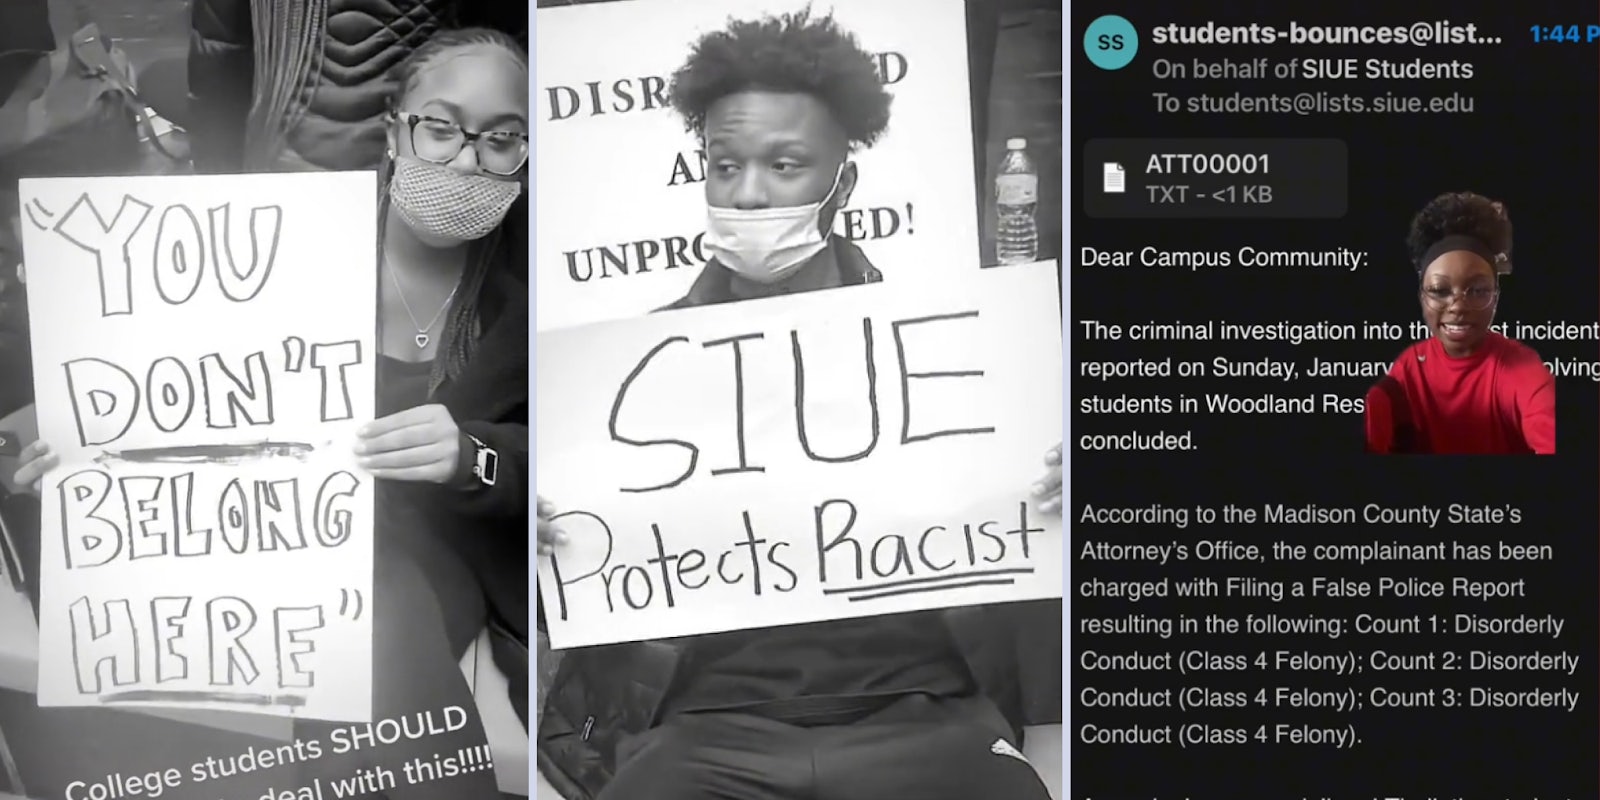 'You don't belong here,' 'SIUE Protects Racist'